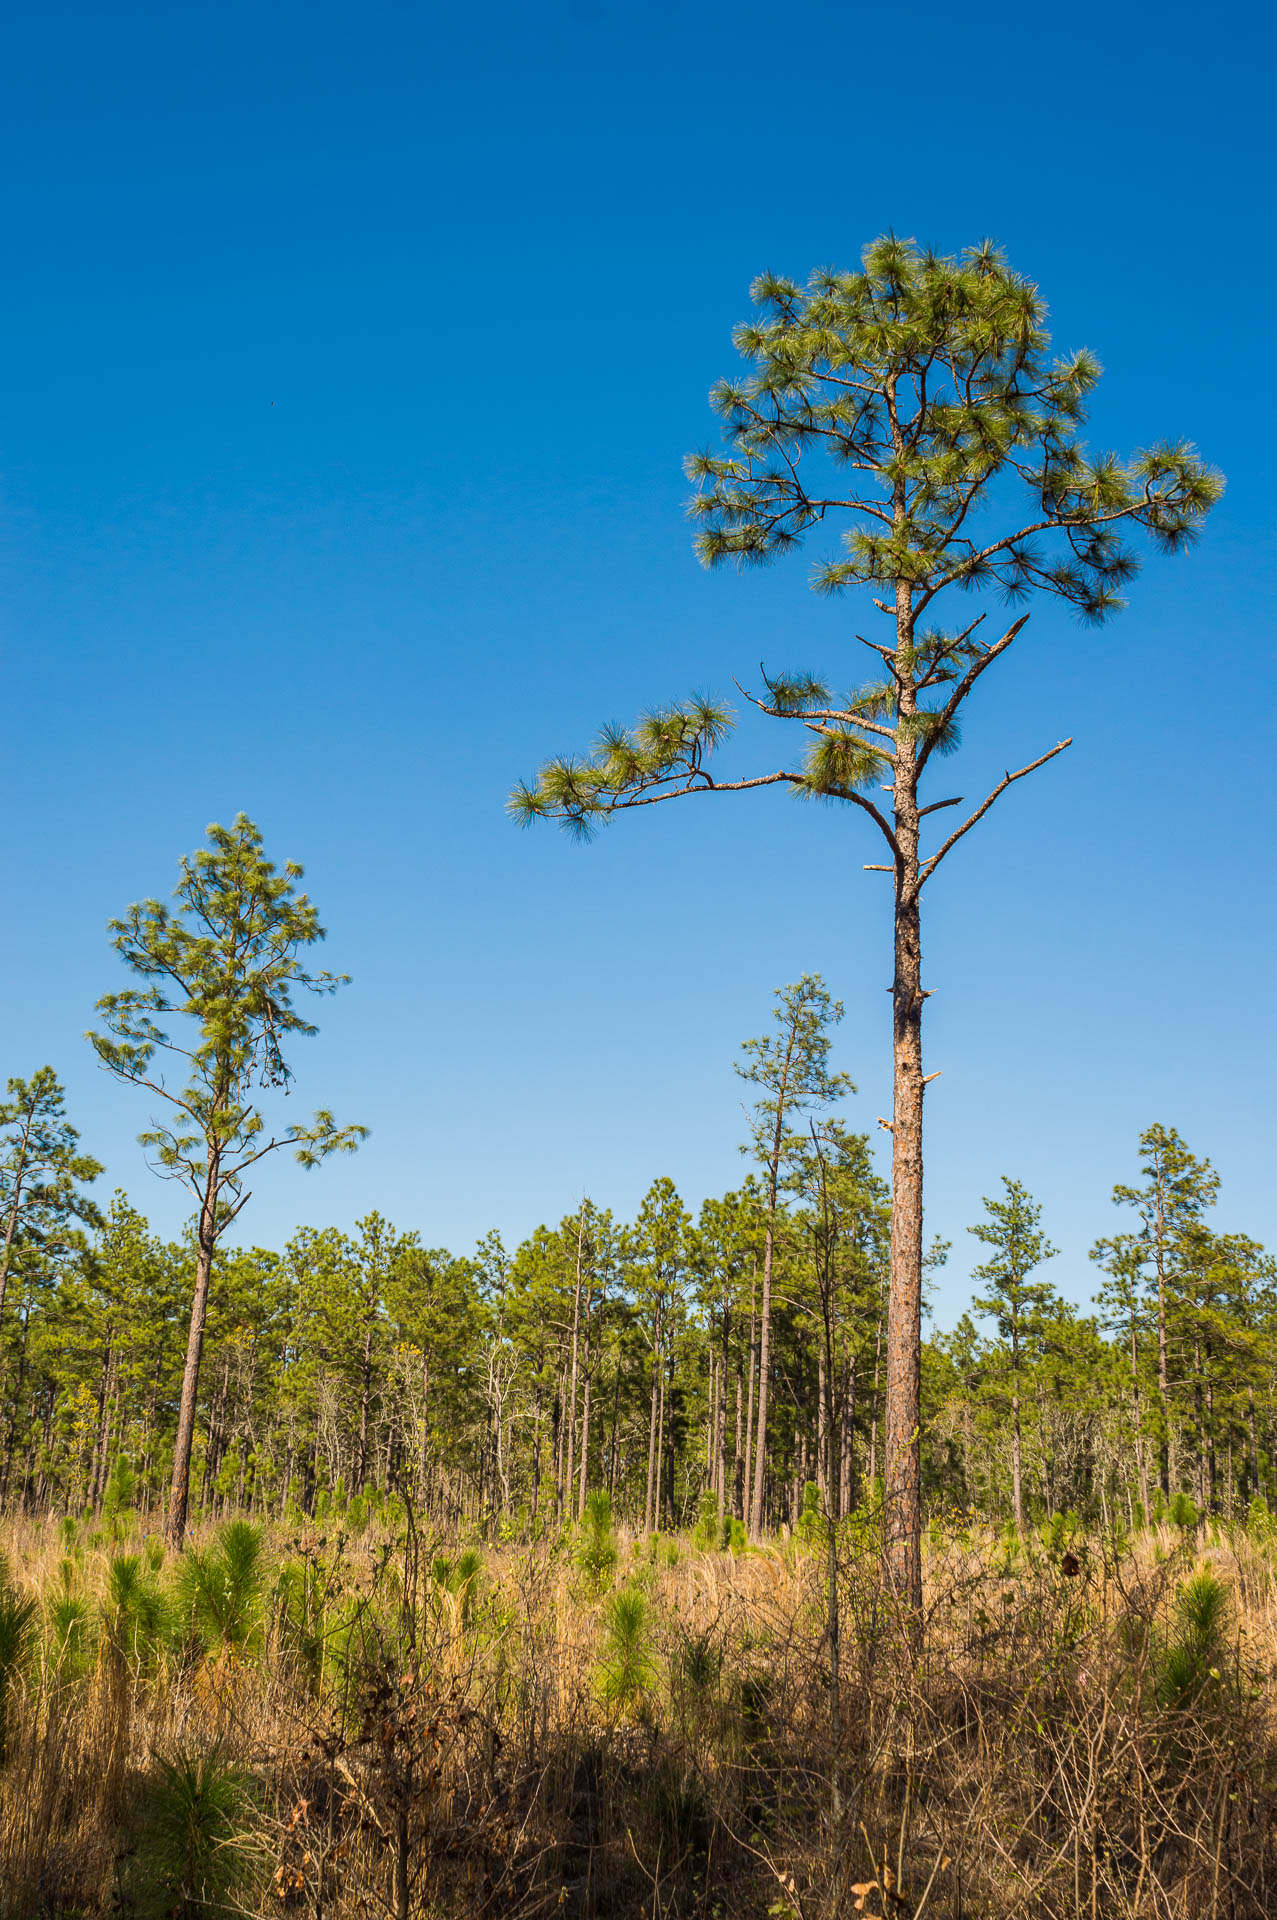 A photograph shows longleaf pine trees with slender trunks that hold canopies of pine needles near their tops. 